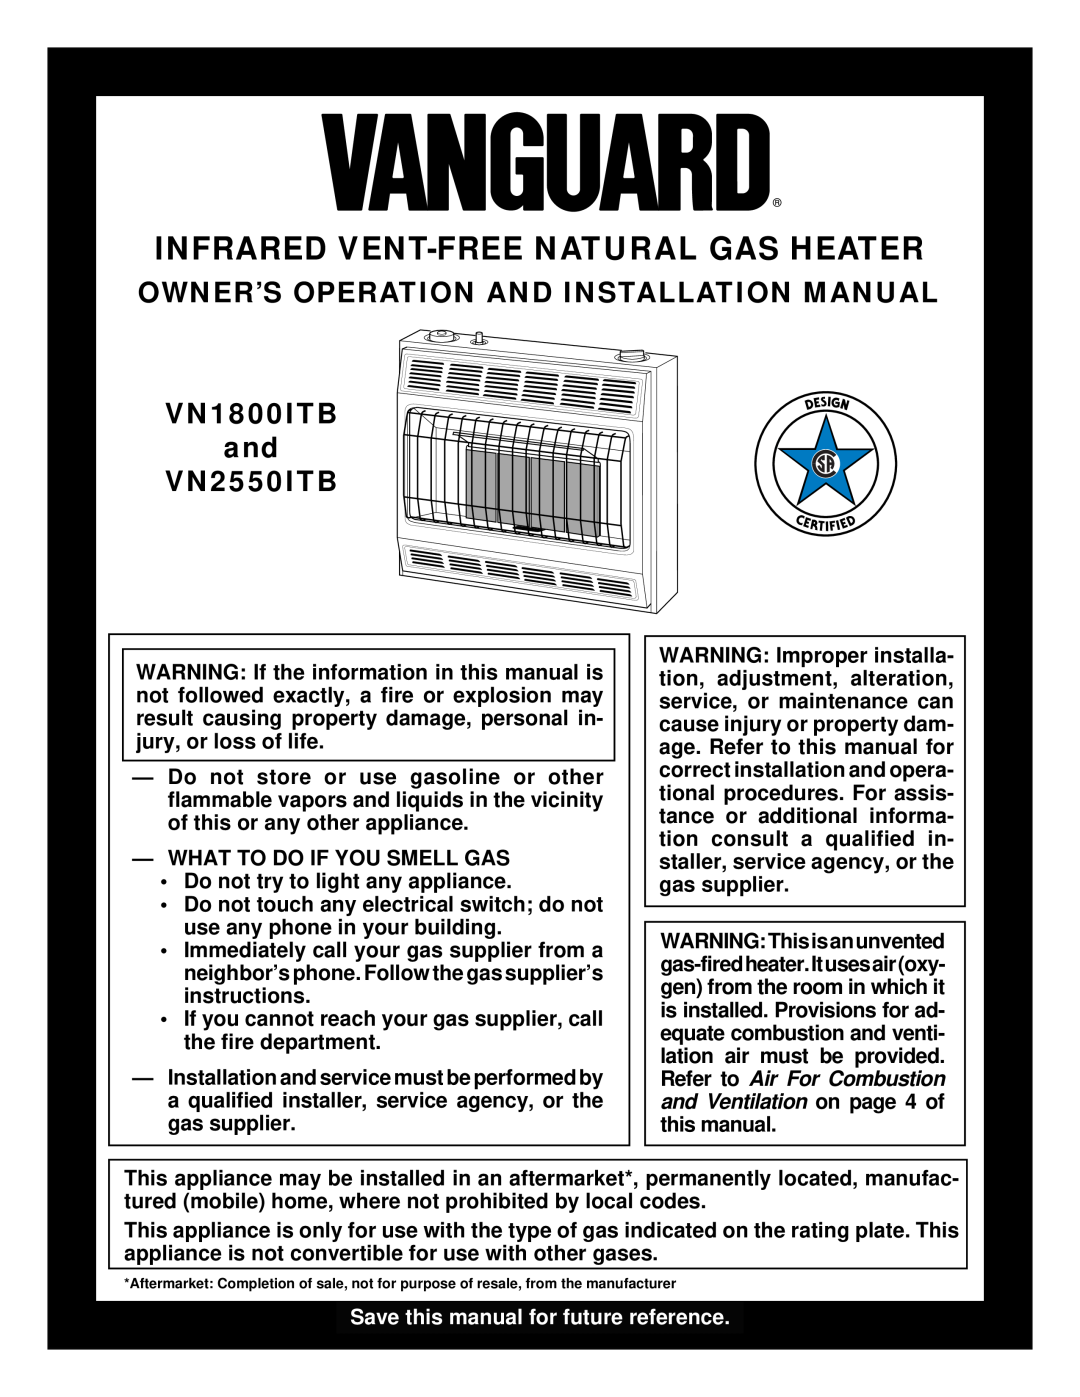 Vanguard Heating installation manual Infrared Vent-Freenatural Gas Heater, VN1800ITB and VN2550ITB 